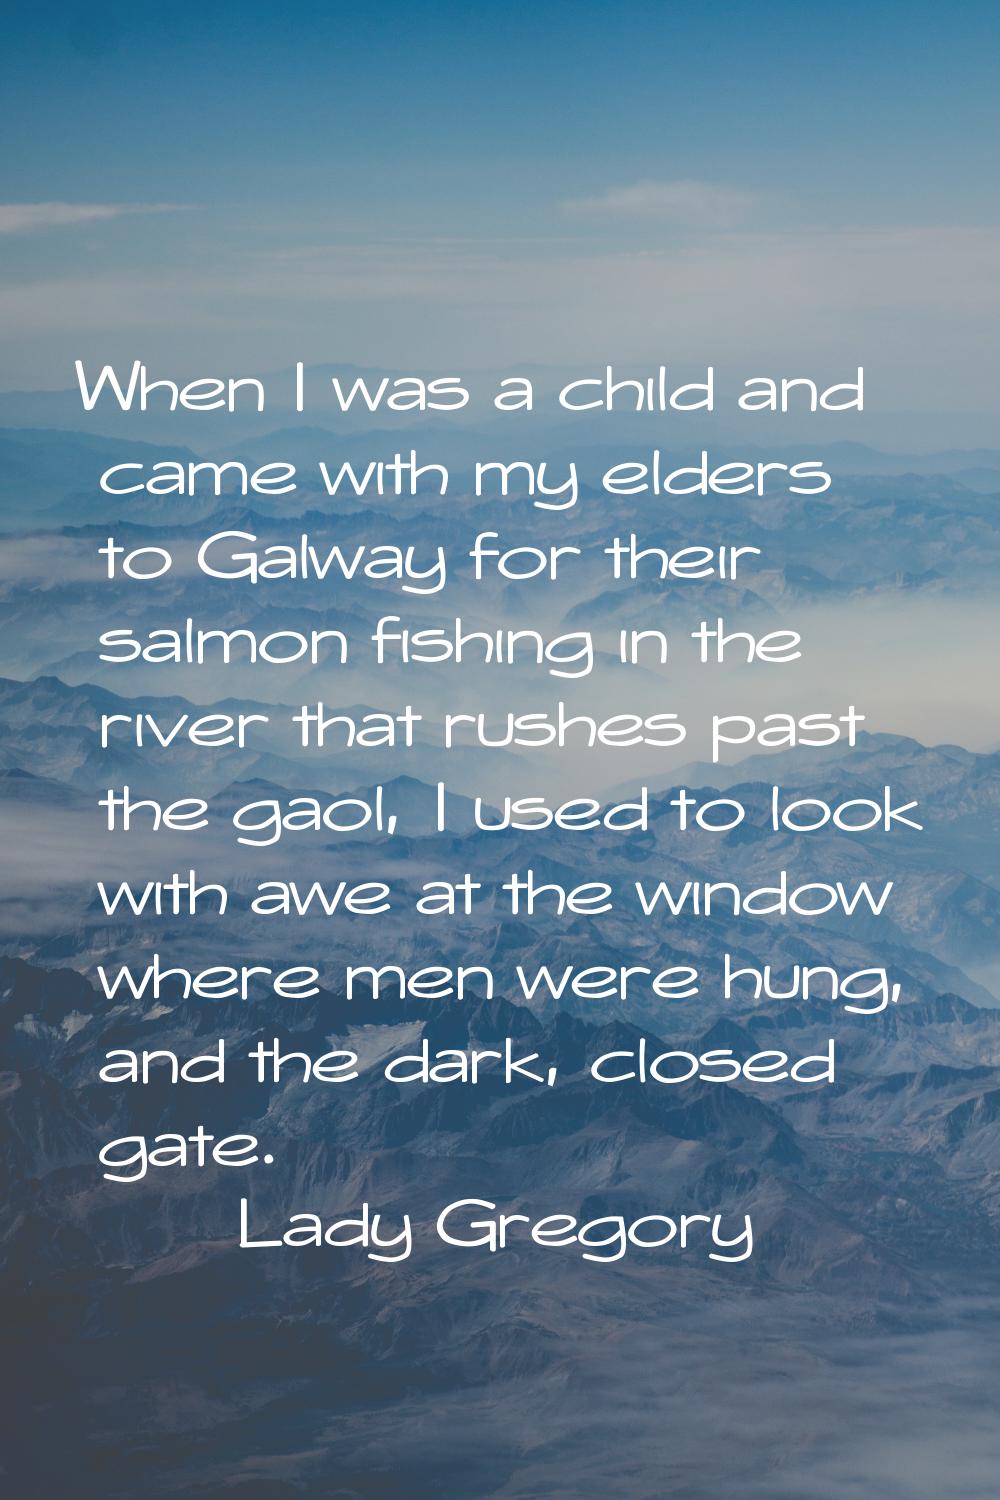 When I was a child and came with my elders to Galway for their salmon fishing in the river that rus